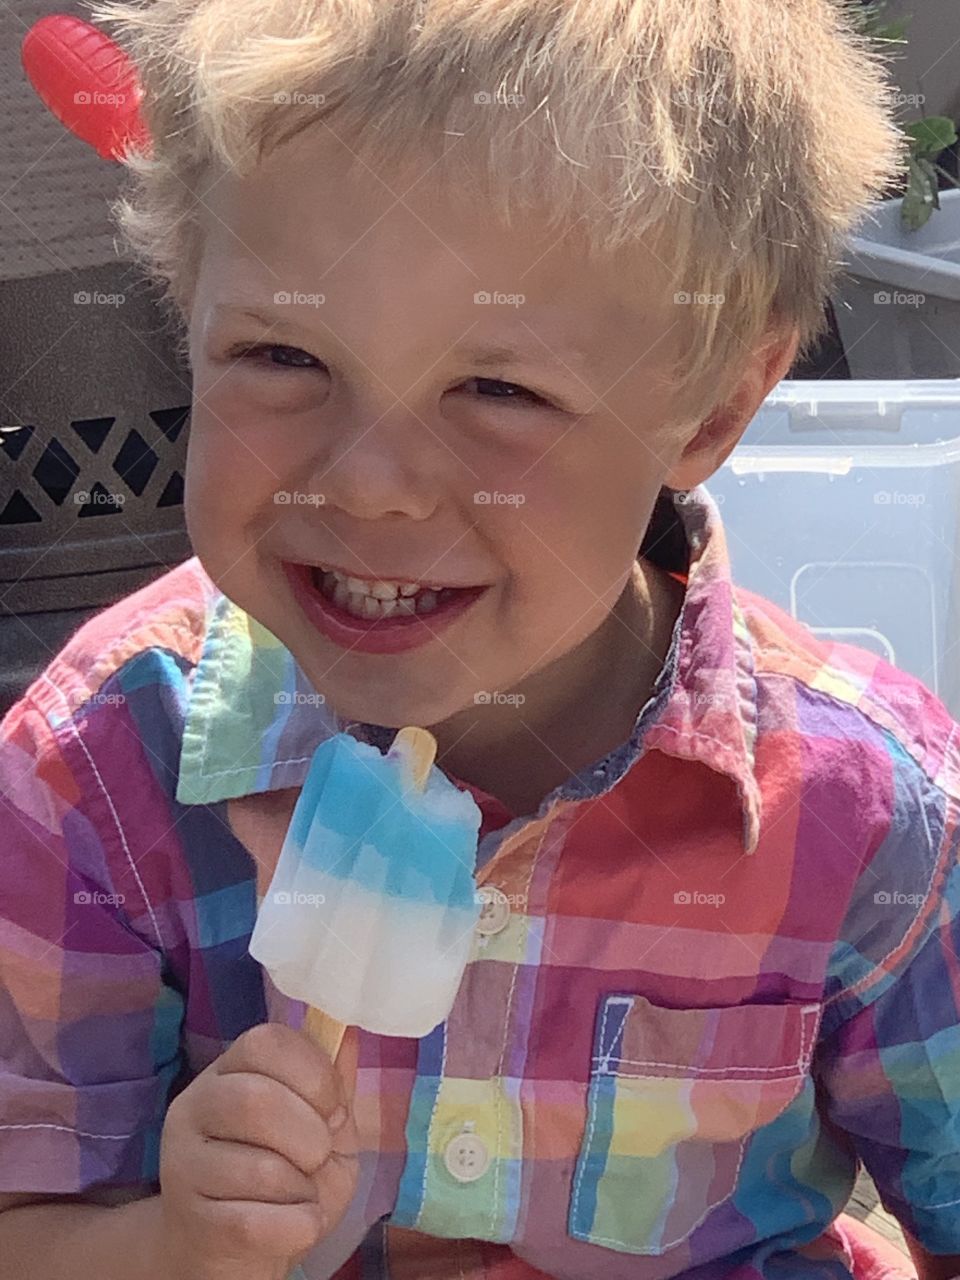 My son eating a popsicle on the deck 